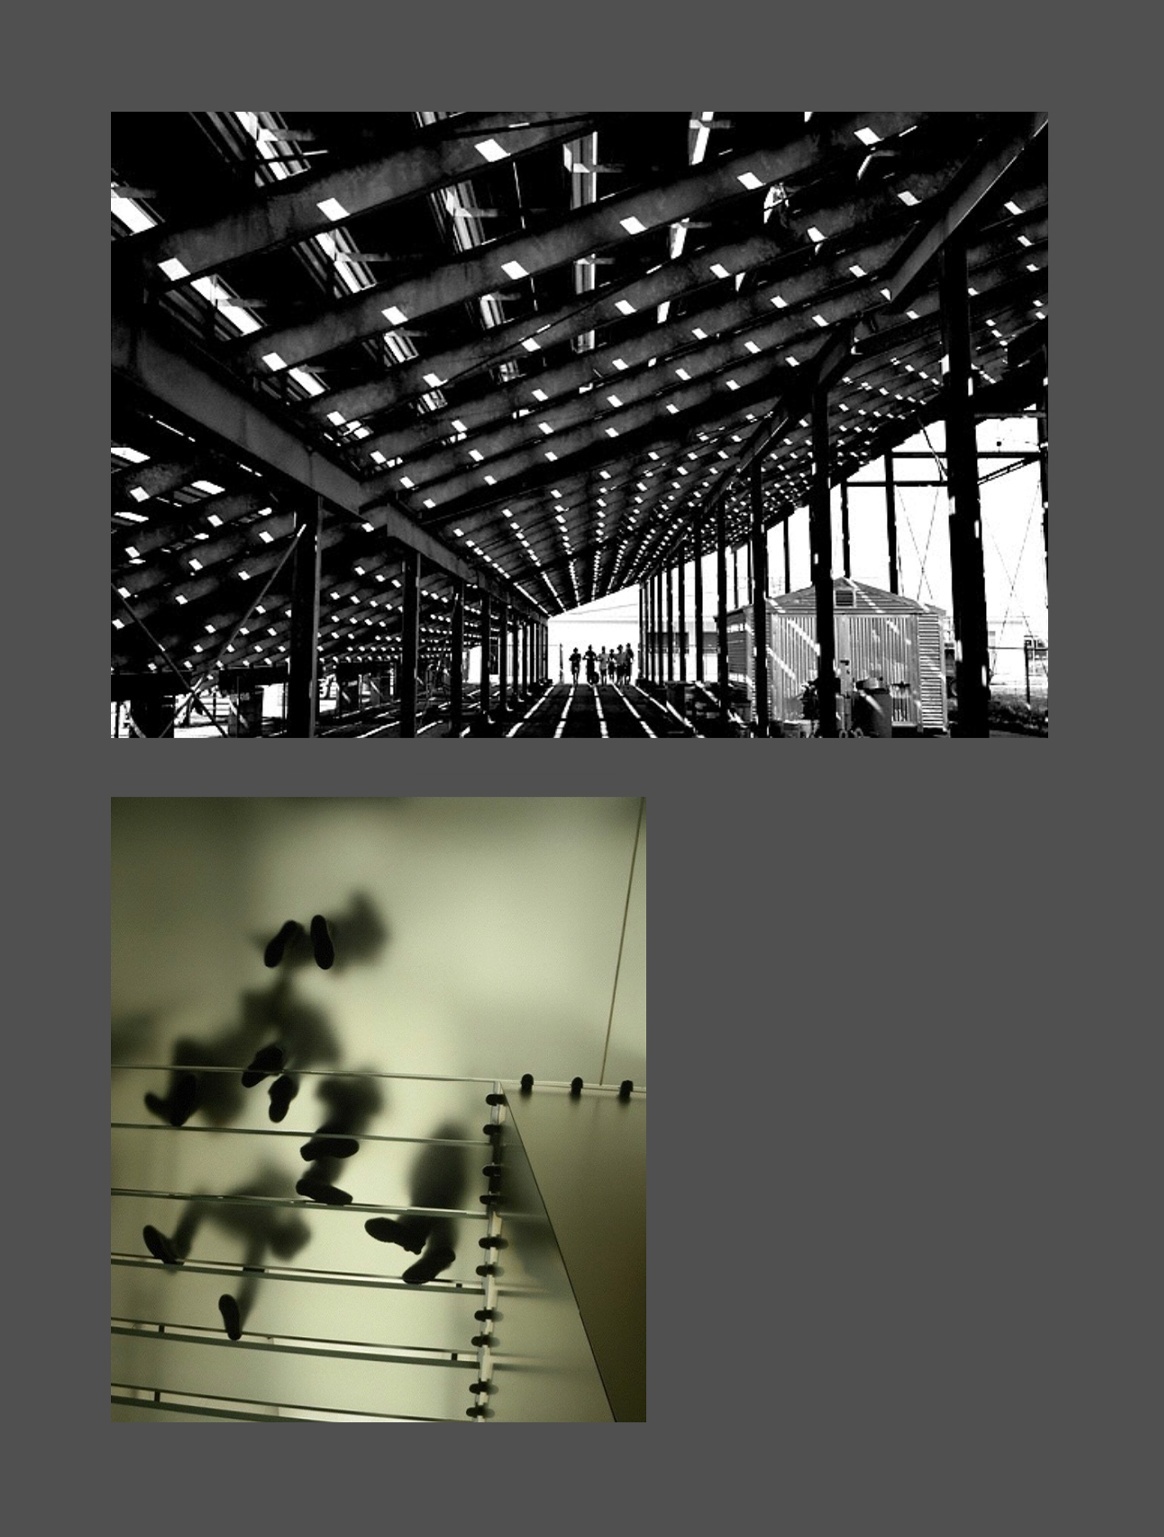 Moodboard of underview of bleachers at a sports stadium, and the view from below of people standing on a frosted glass structure